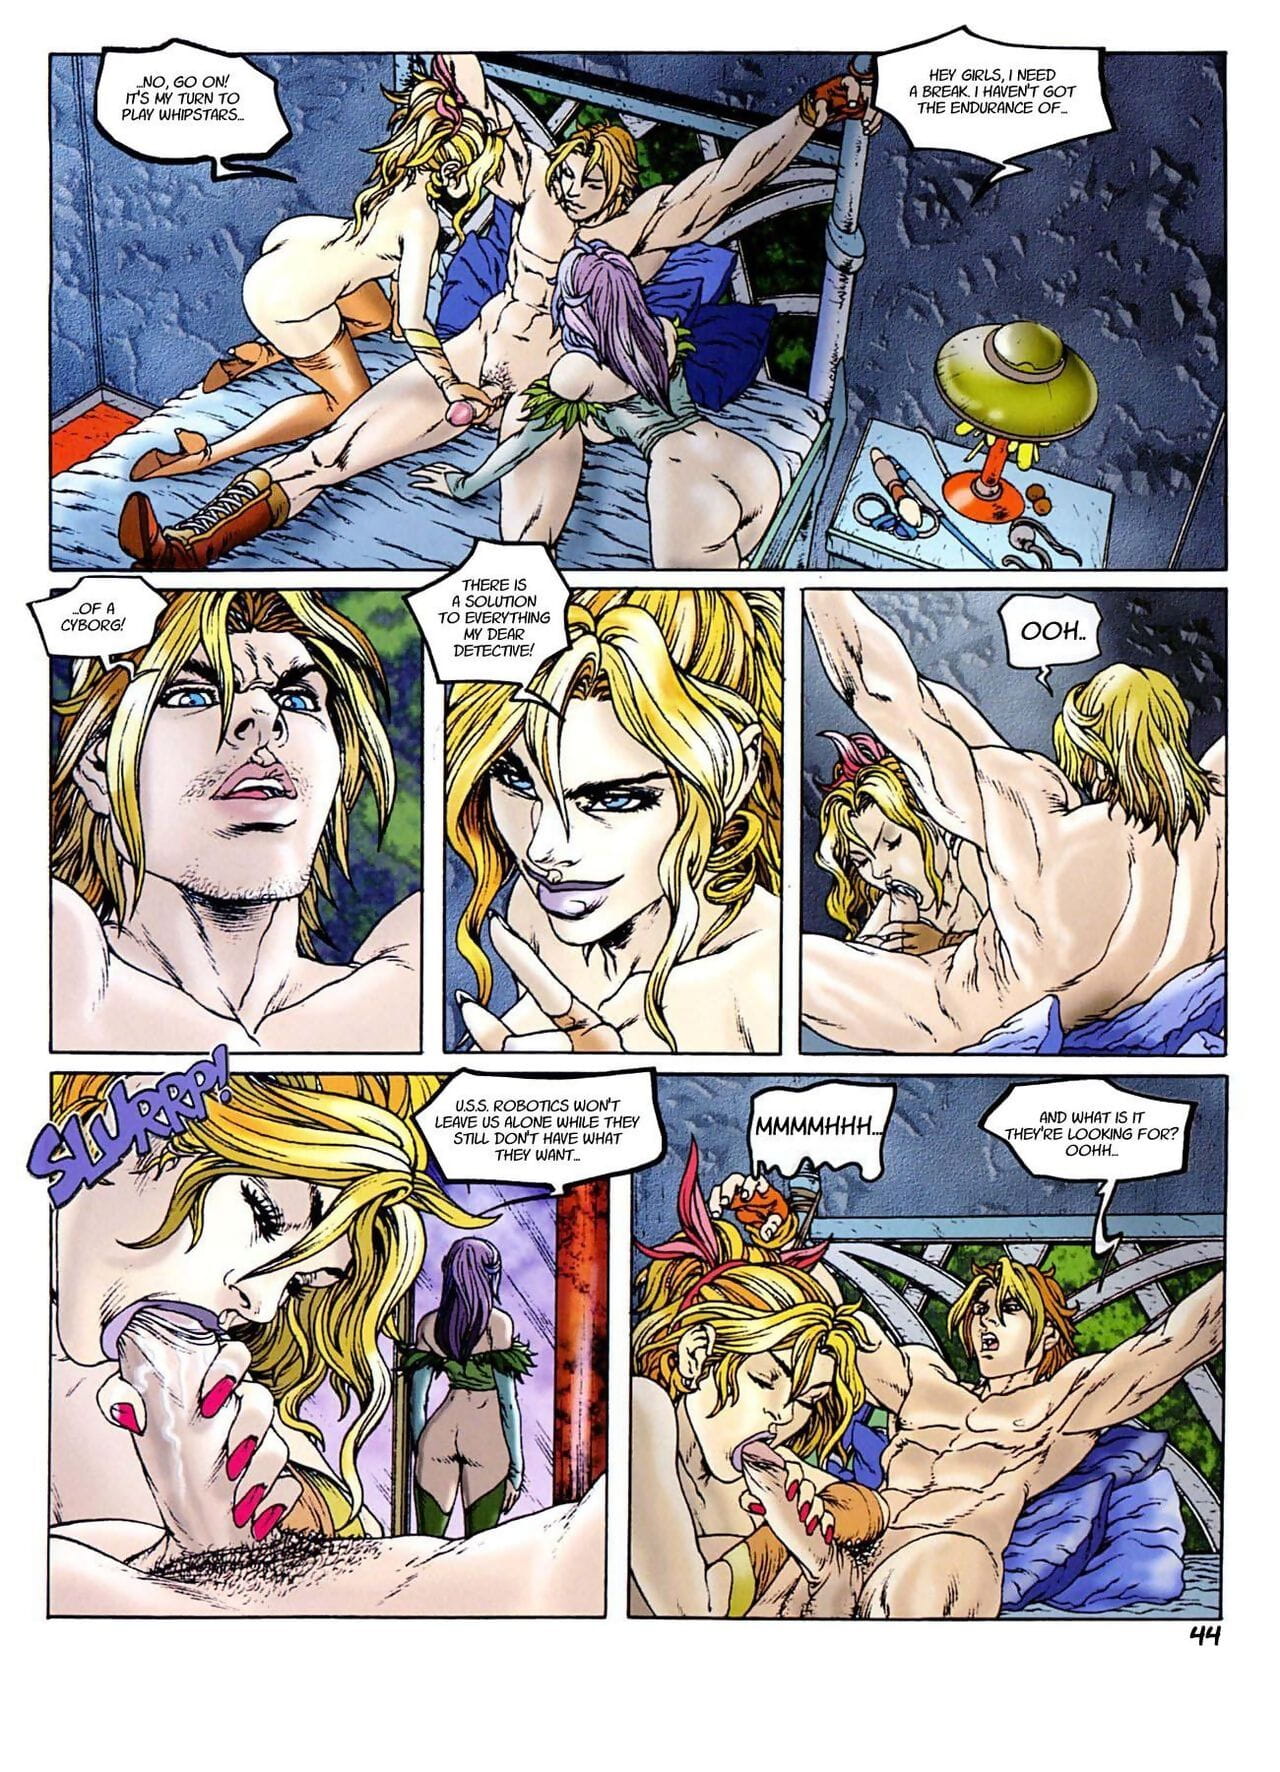 Sexy Cyborg - part 2 page 1